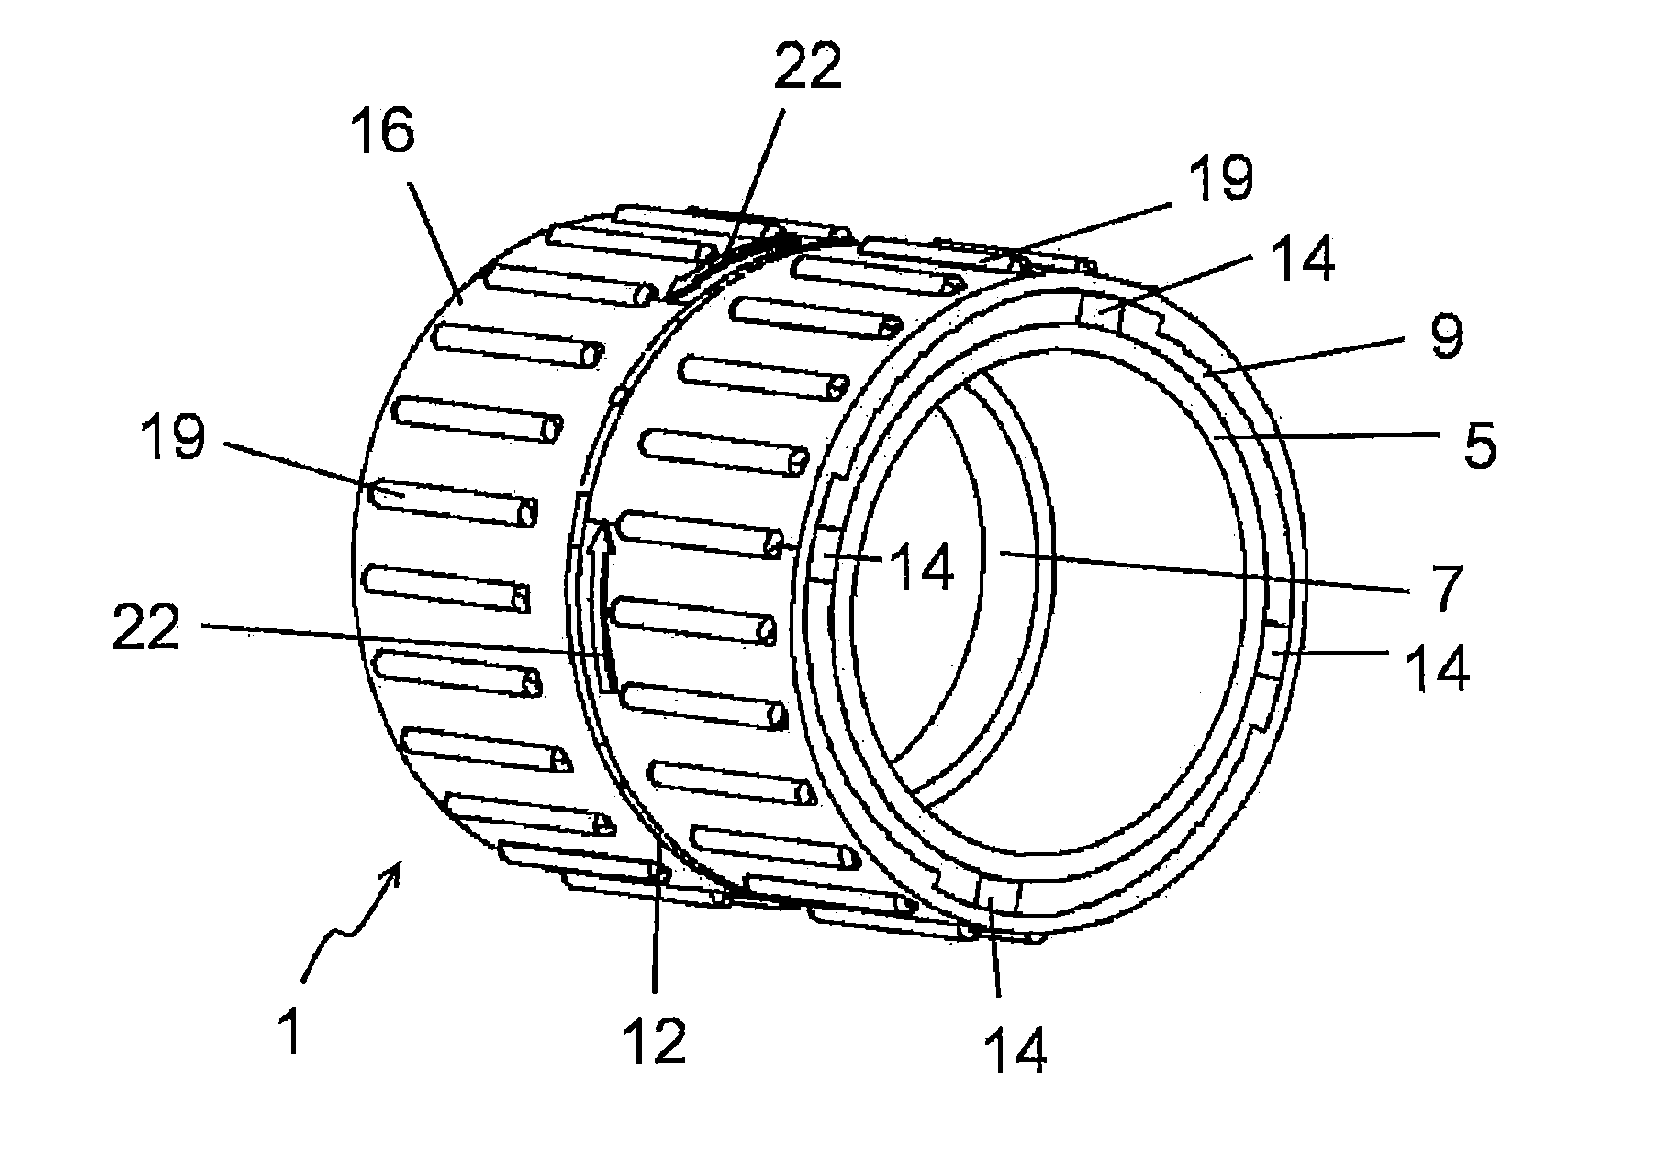 Component Connector for Connecting Cylindrical Components